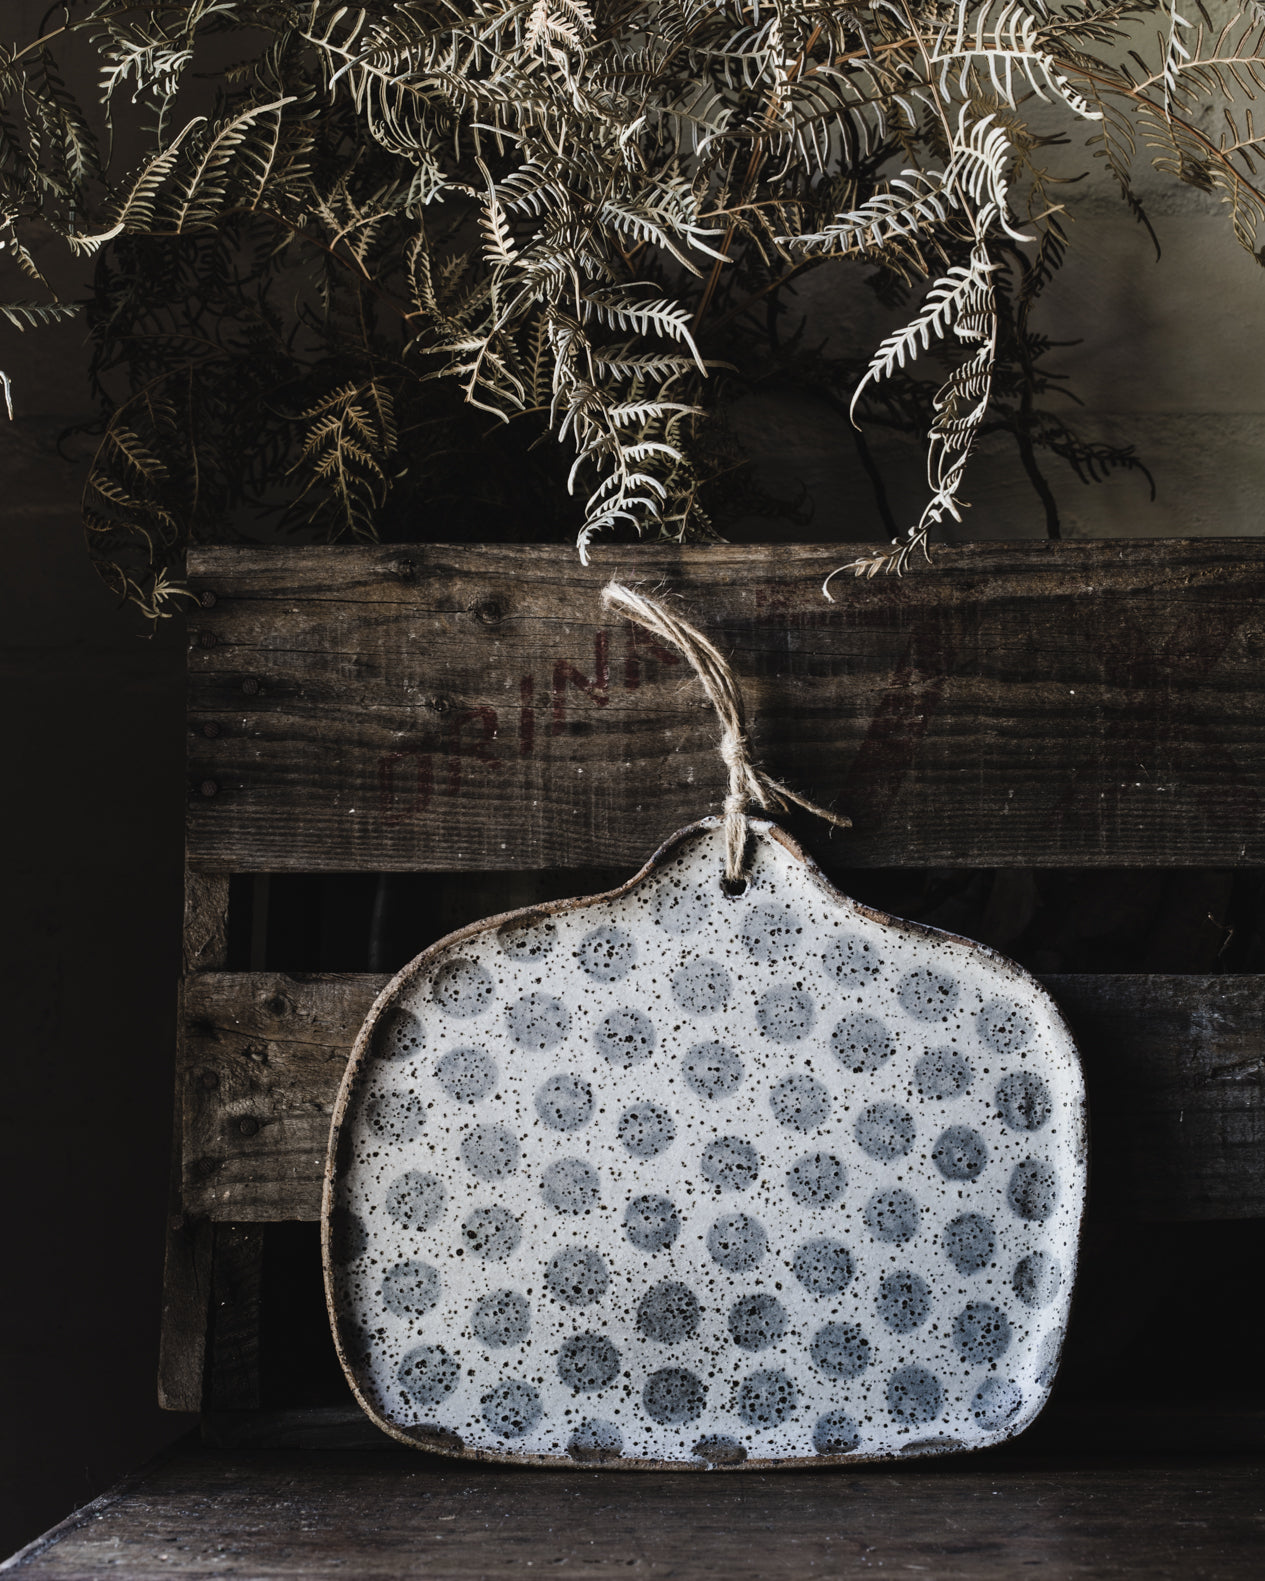 Rustic speckled polka dot platter in square shape with easy grip hand + hemp cord by clay beehive ceramics